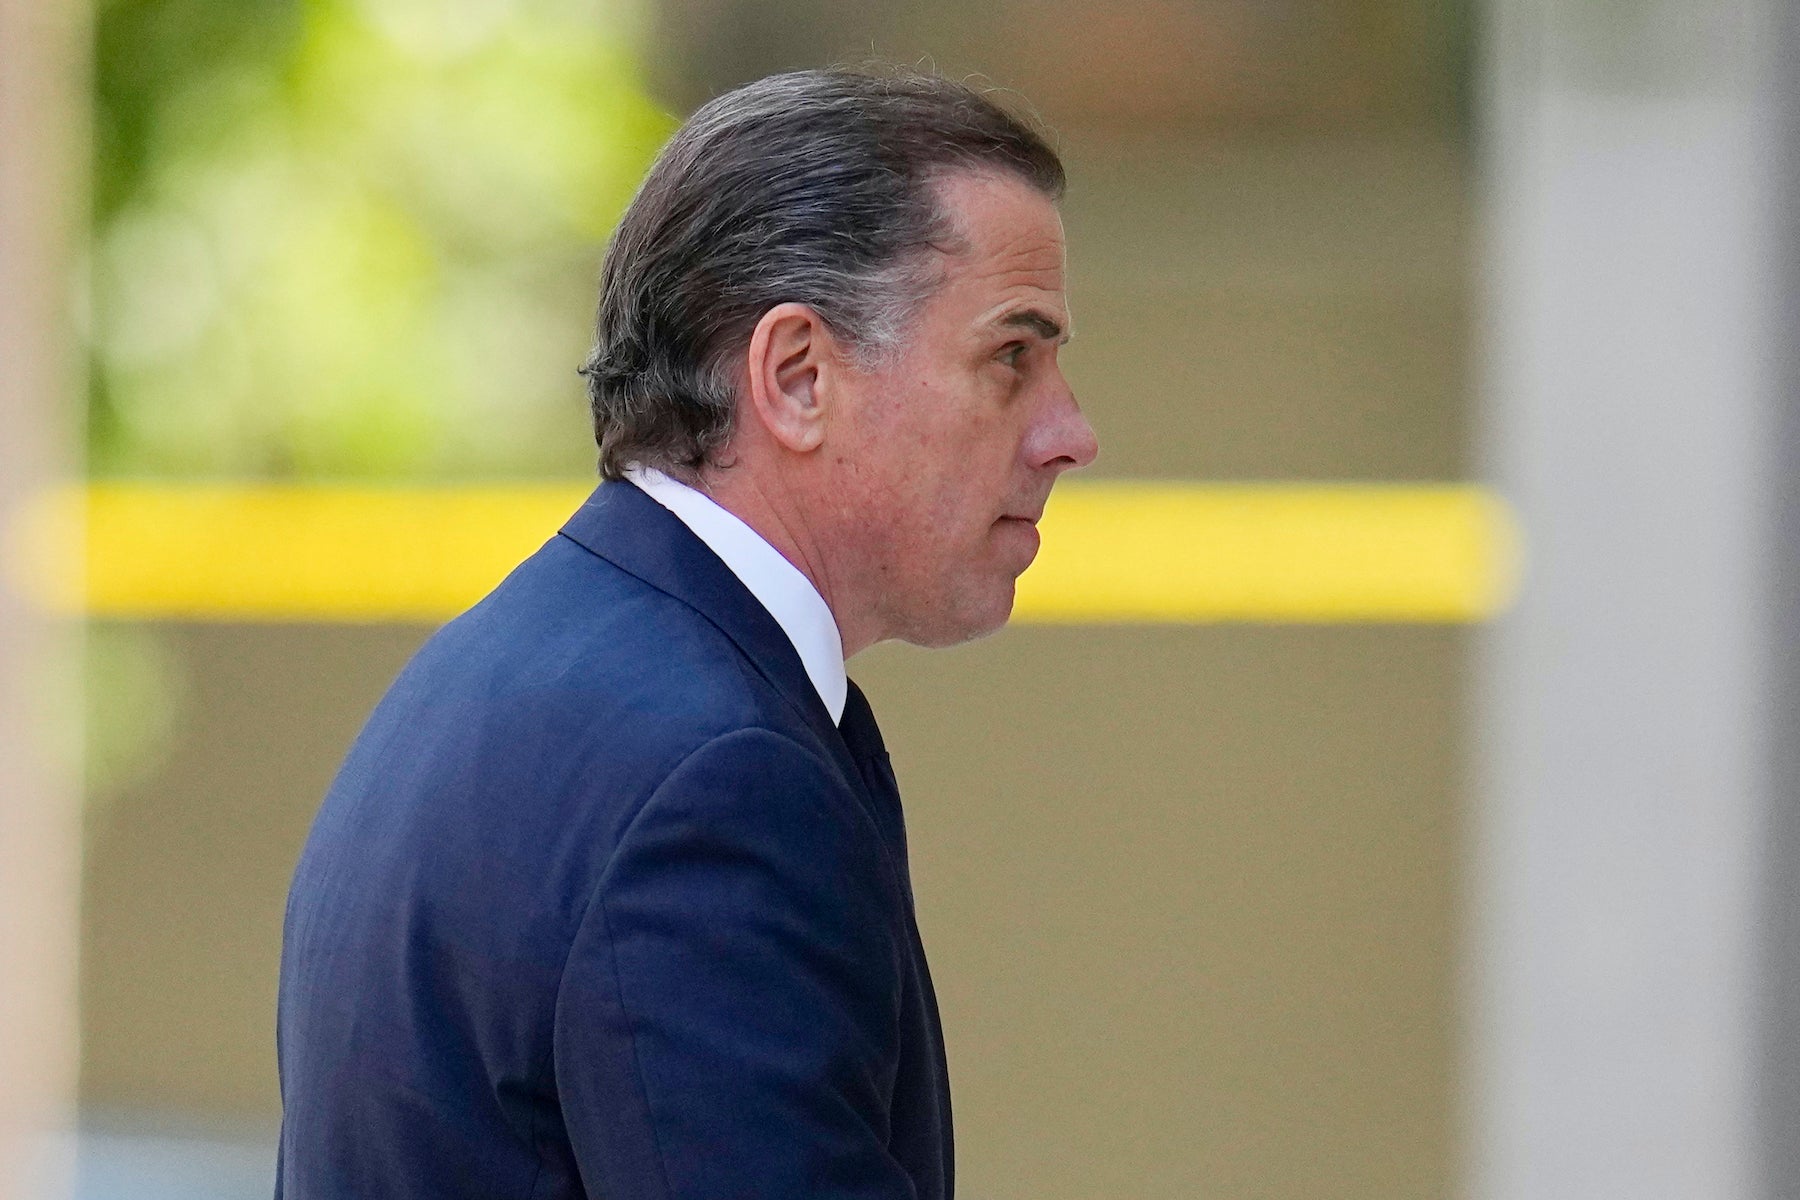 Hunter Biden’s plea deal on tax and gun charges collapses - WHYY